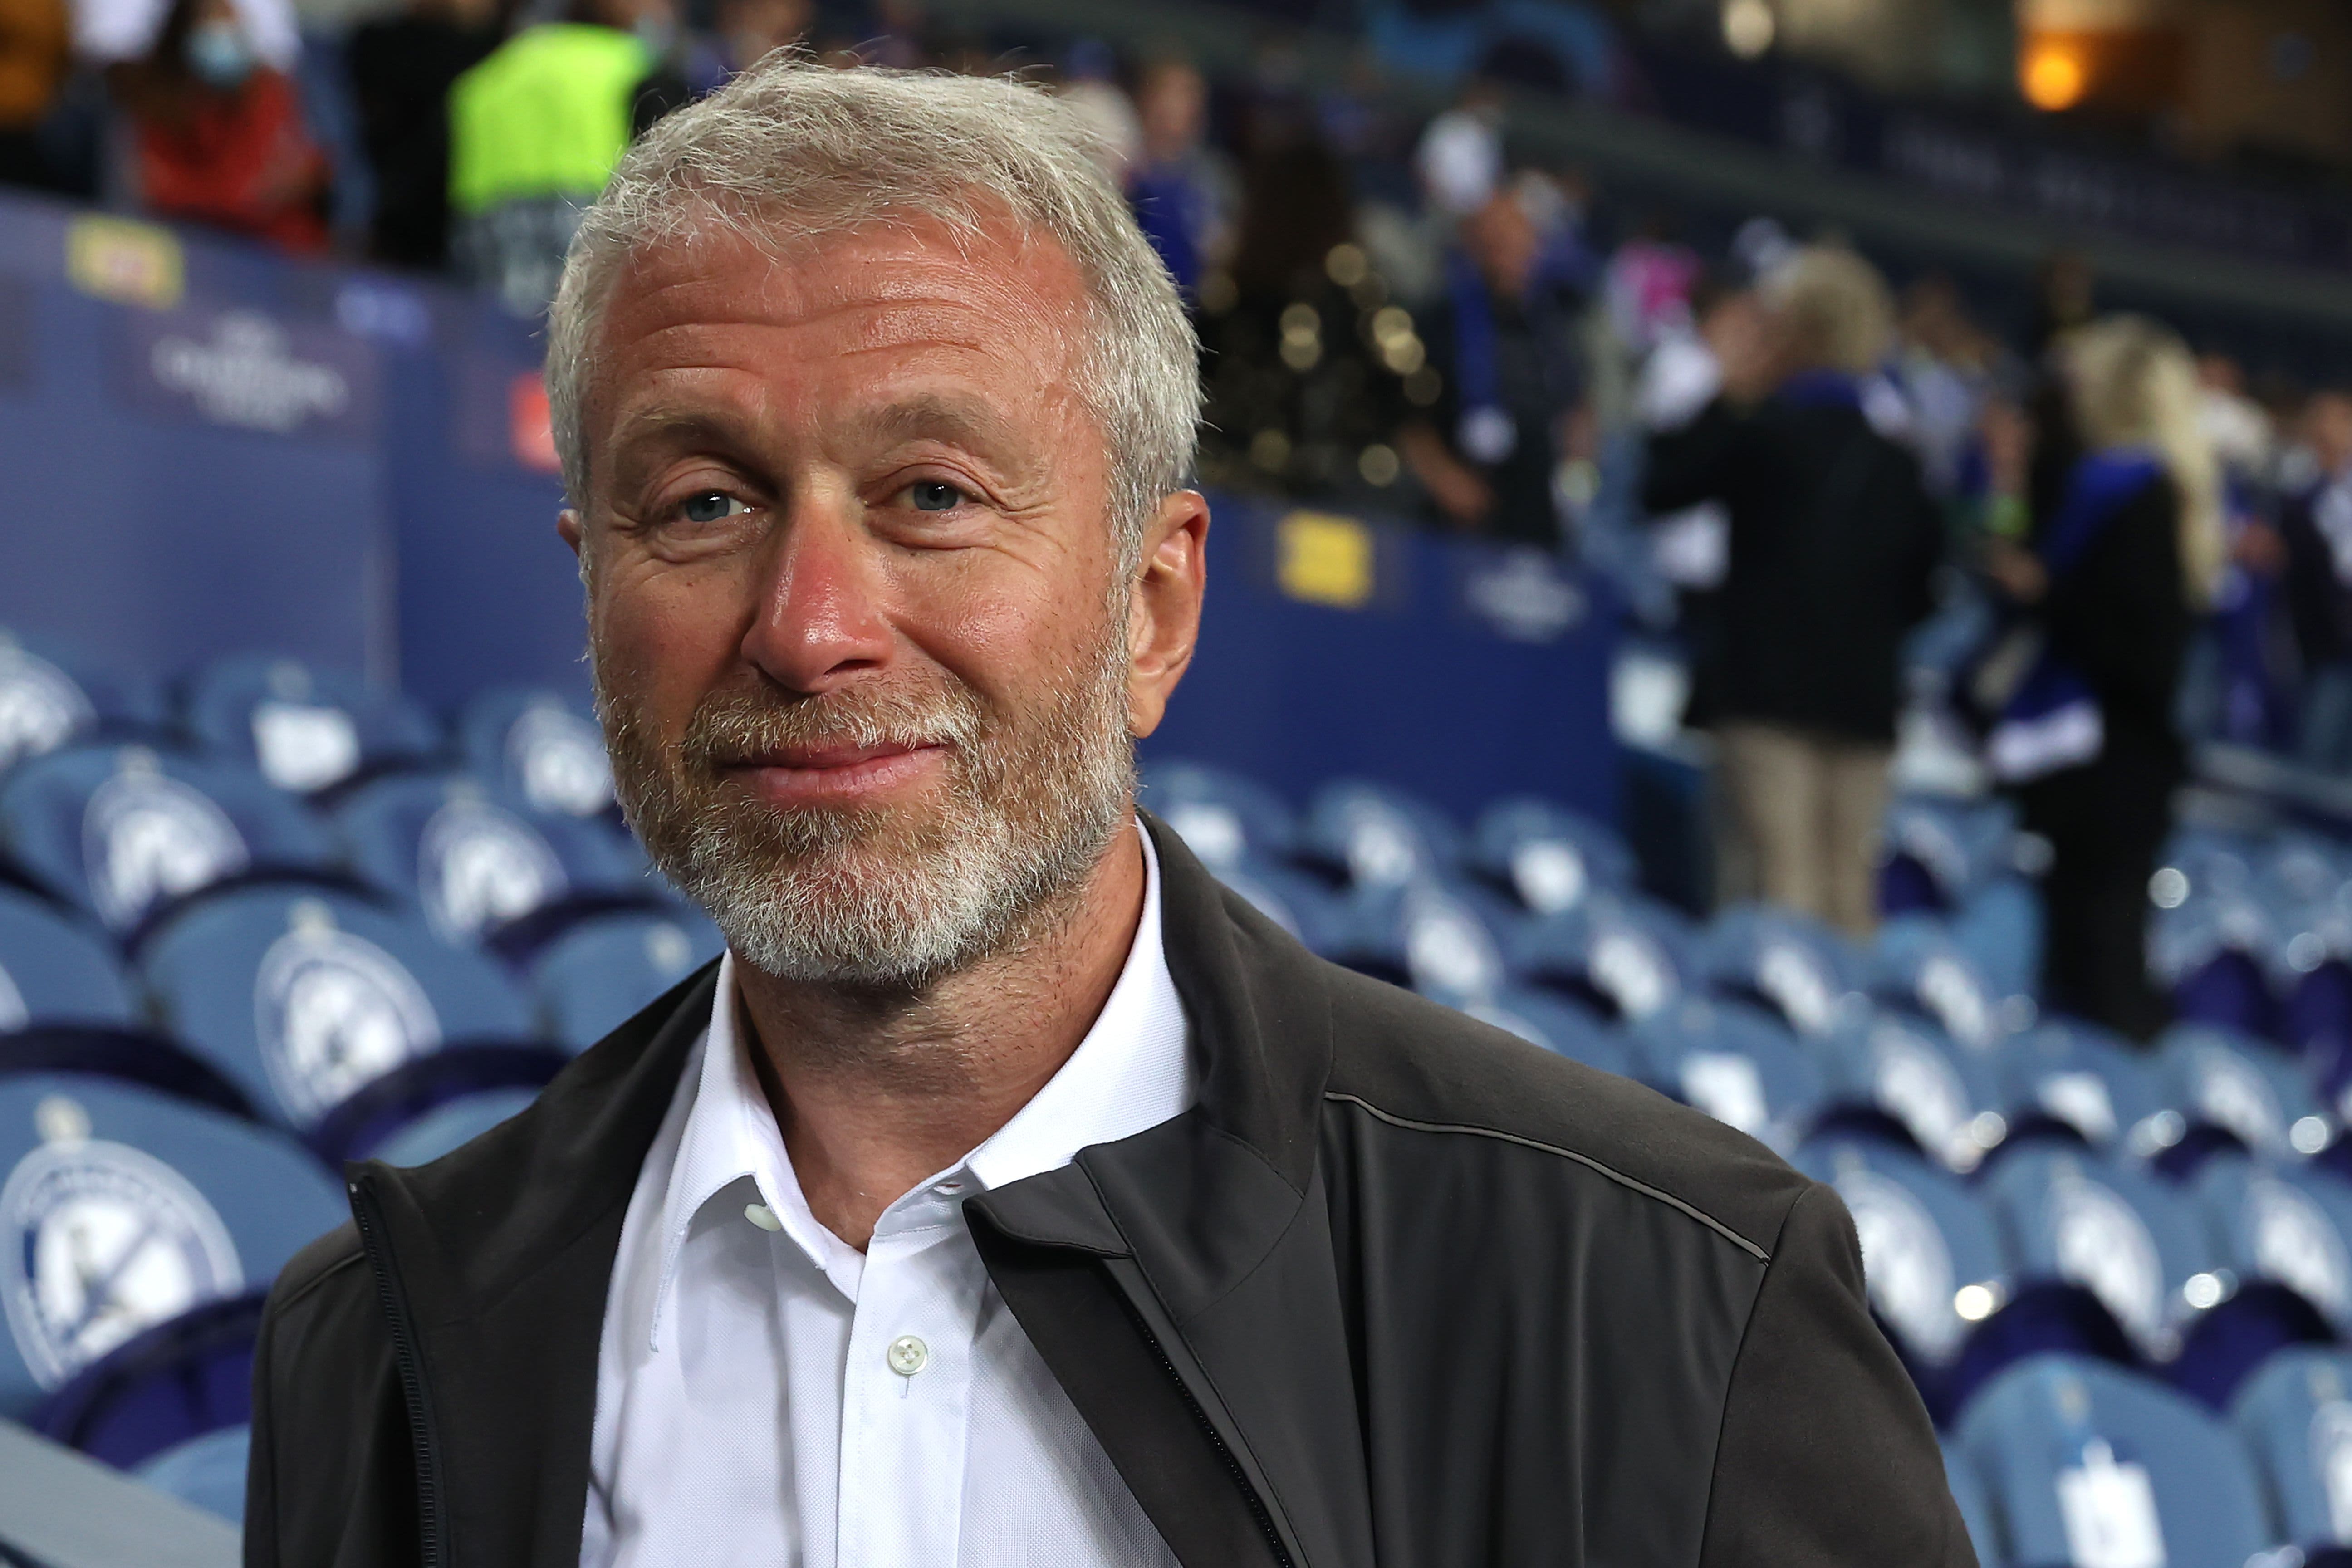 UK adds Russian billionaire and Chelsea soccer club owner Roman Abramovich to sanctions list